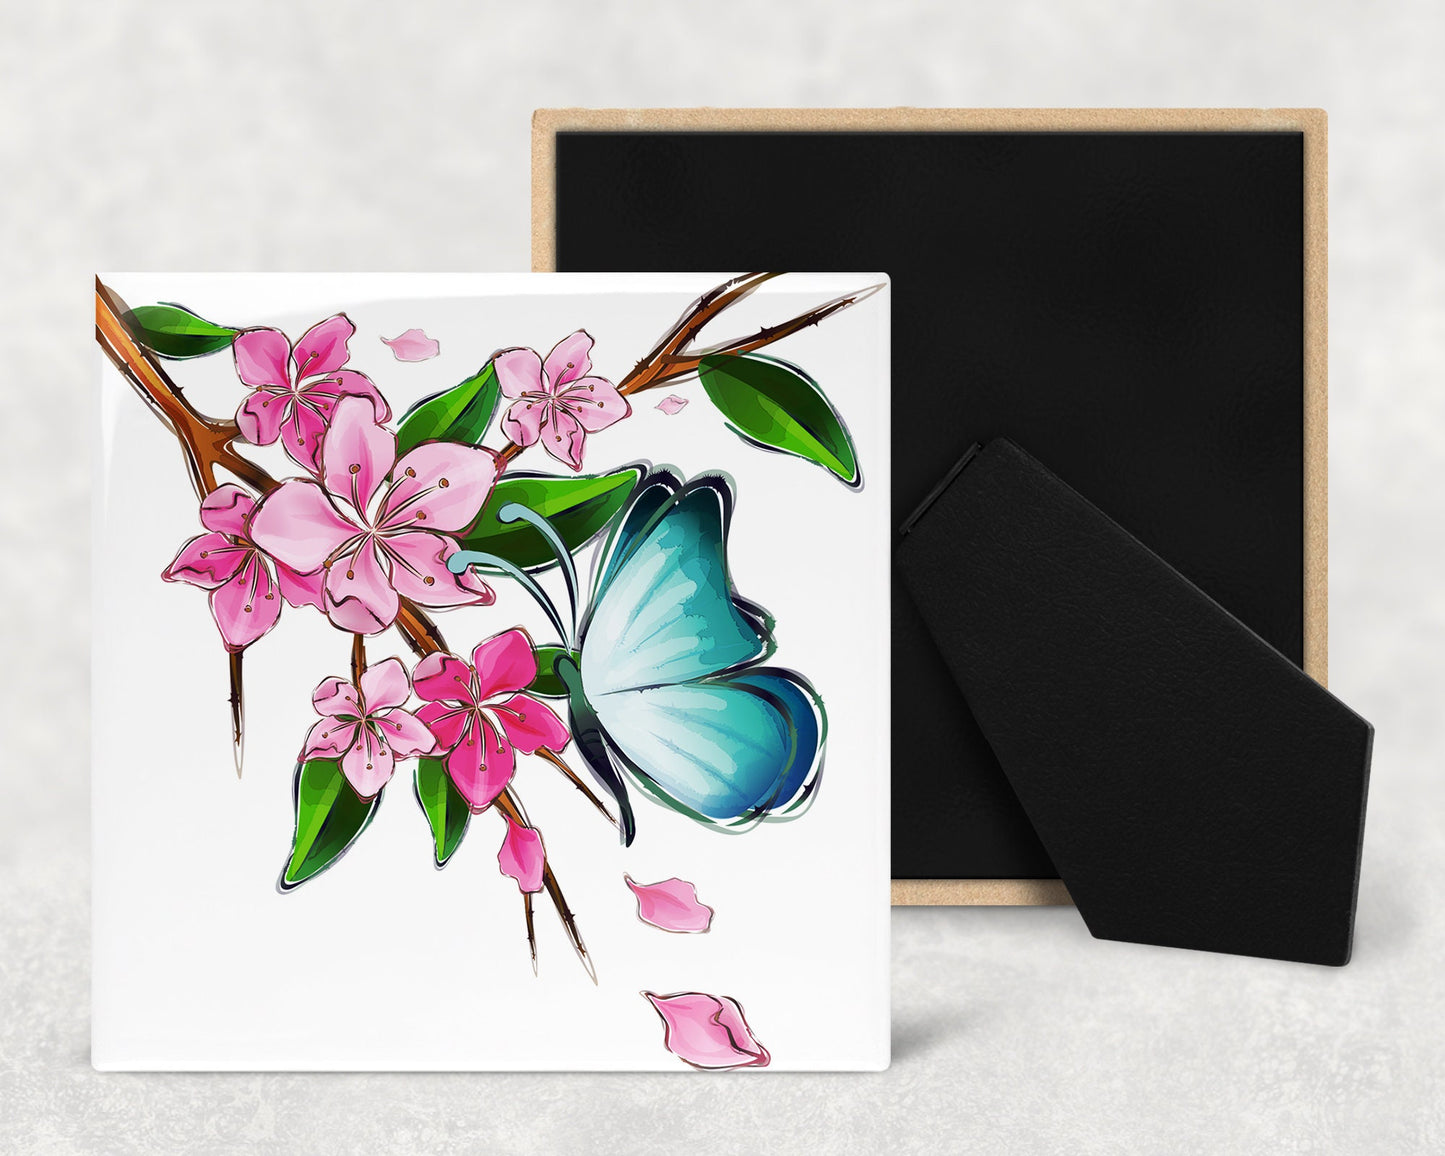 Butterflies and Cherry Blossoms Art Decorative Ceramic Tile with Optional Easel Back - Available in 3 Sizes